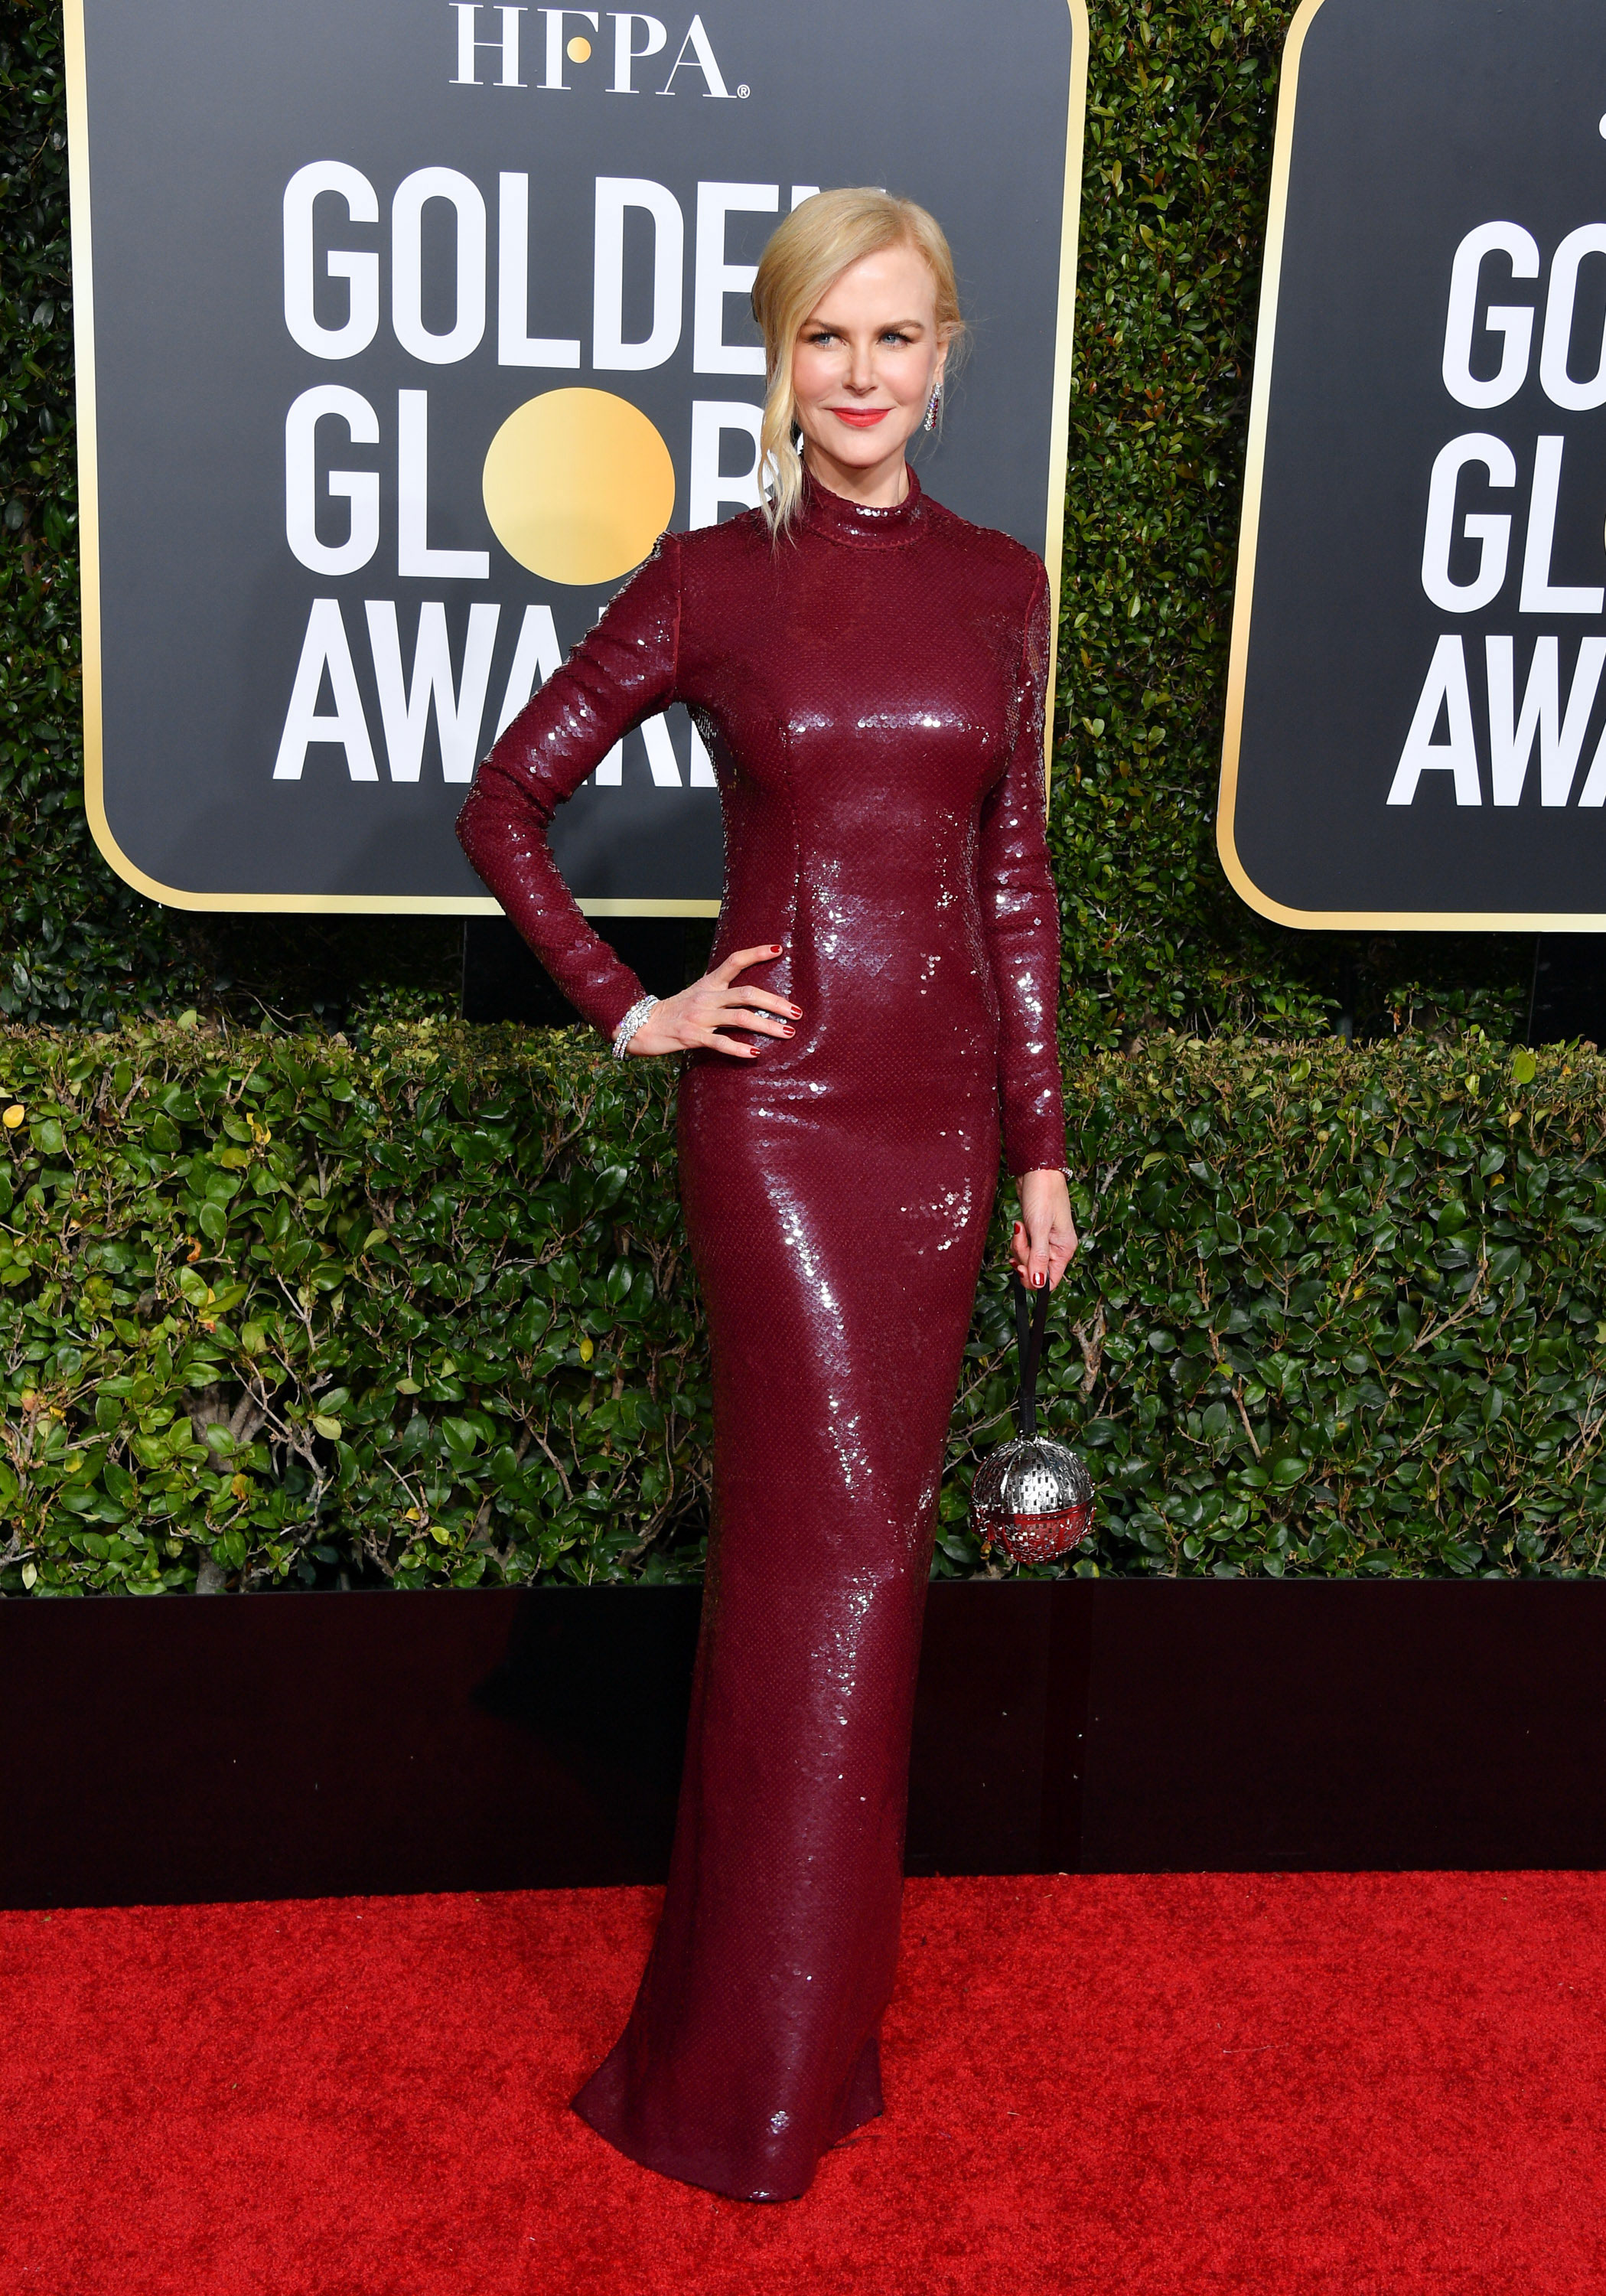 Nicole Kidman's dramatic red carpet look at the Golden Globes OverSixty